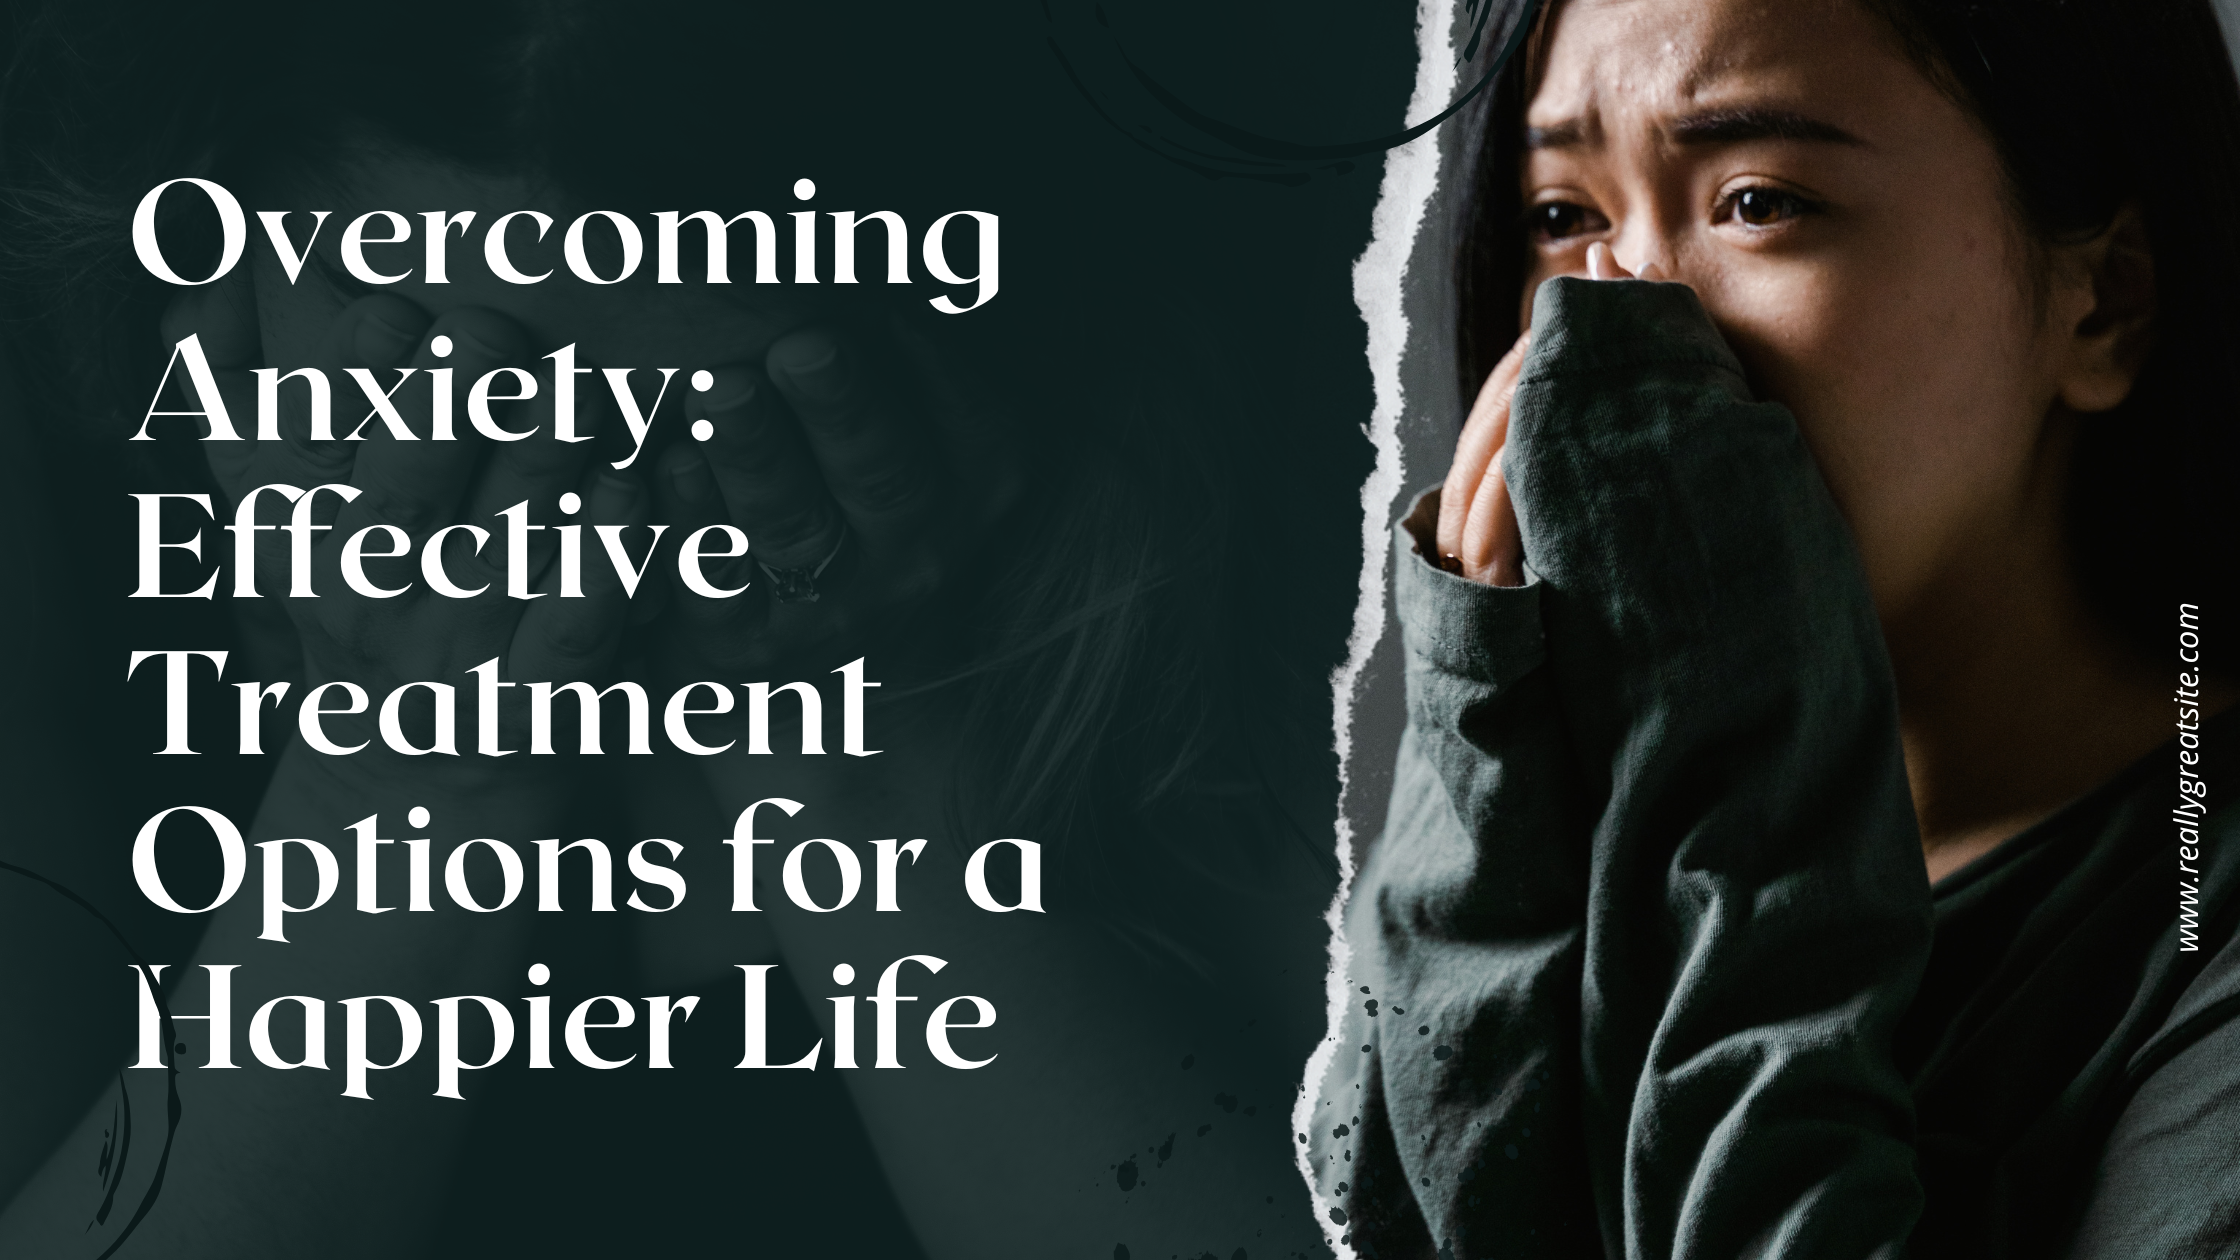 Overcoming Anxiety Effective Treatment Options for a Happier Life